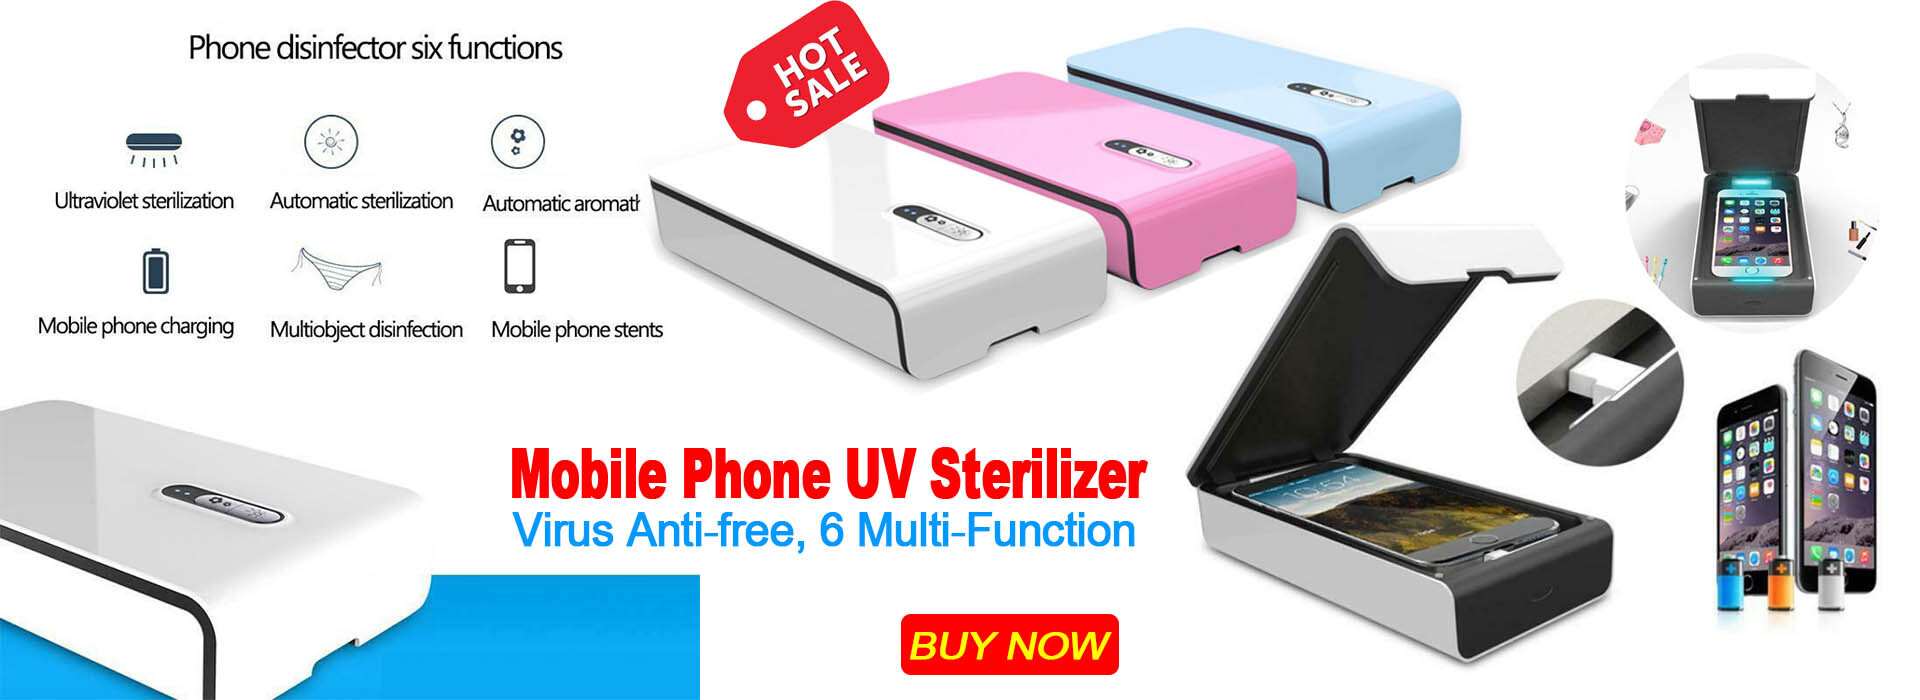 How sterilize your phone?